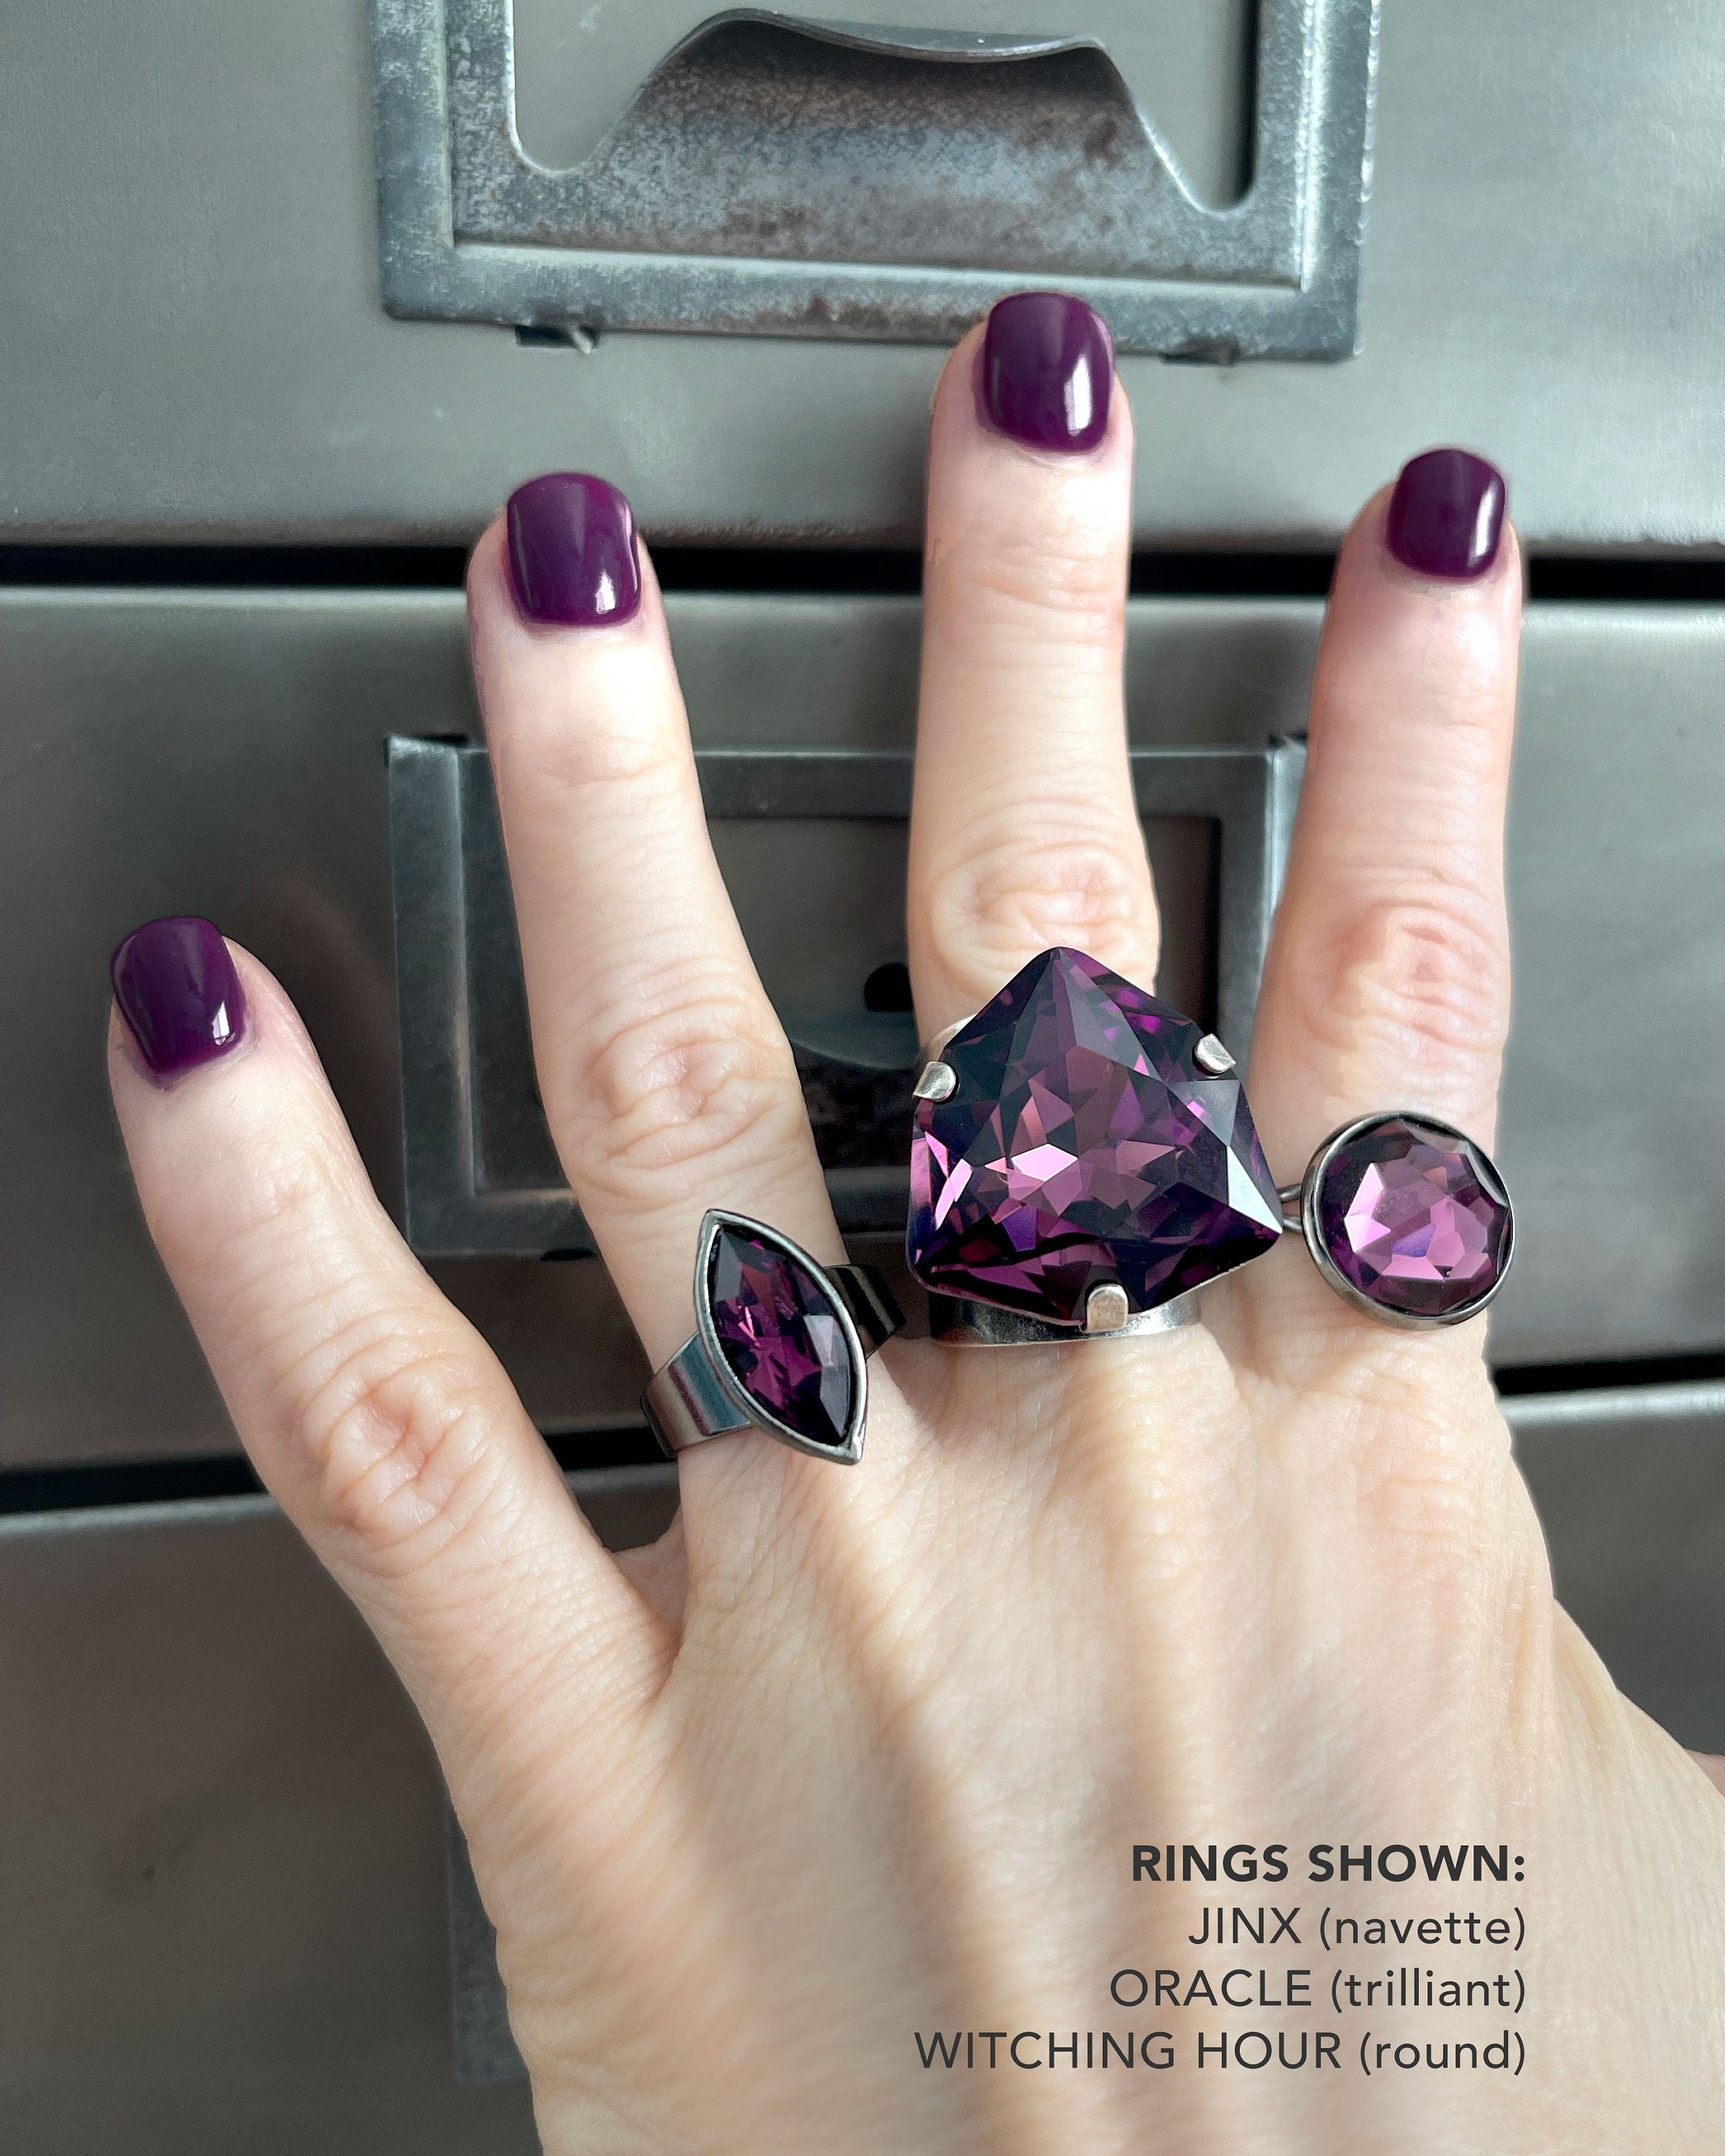 ORACLE - Large Purple Crystal Ring, Stunning Rare Trilliant 'Amethyst' Crystal - Wide Cuff Band, Adjustable Ring - Wicked Halloween Ring